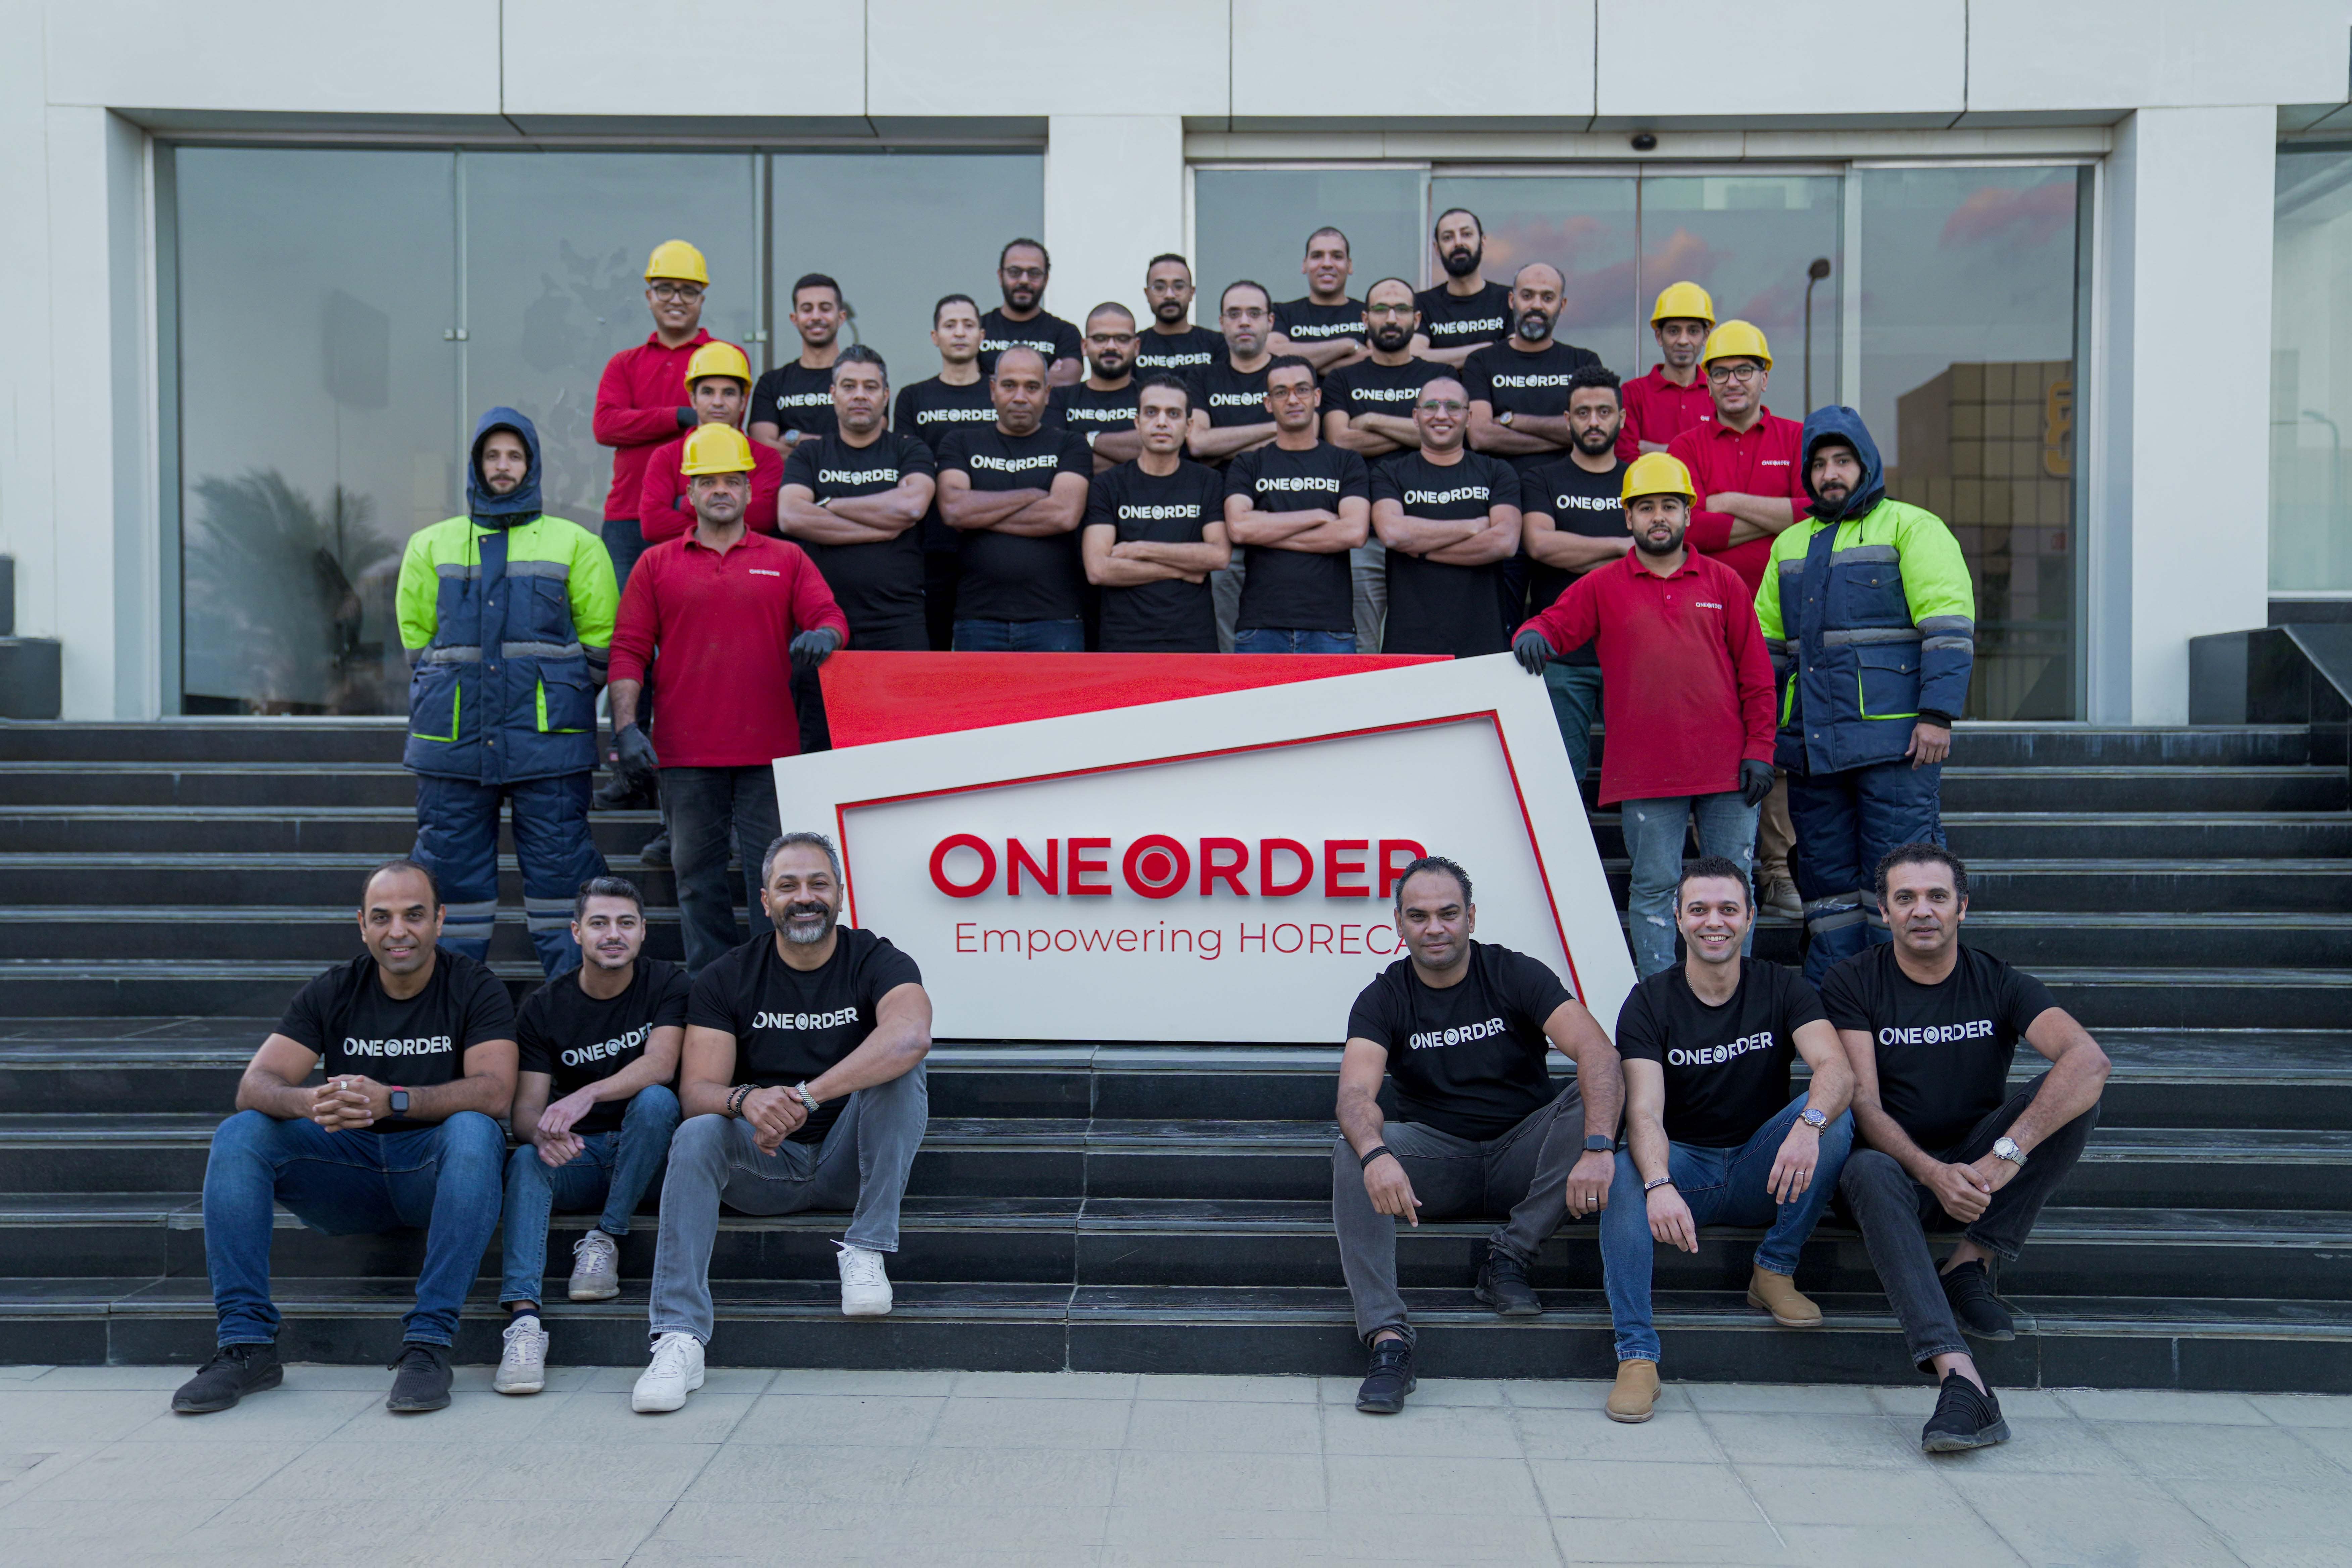 With $3M fresh funding, Egyptian startup OneOrder sets out on boost force thumbnail